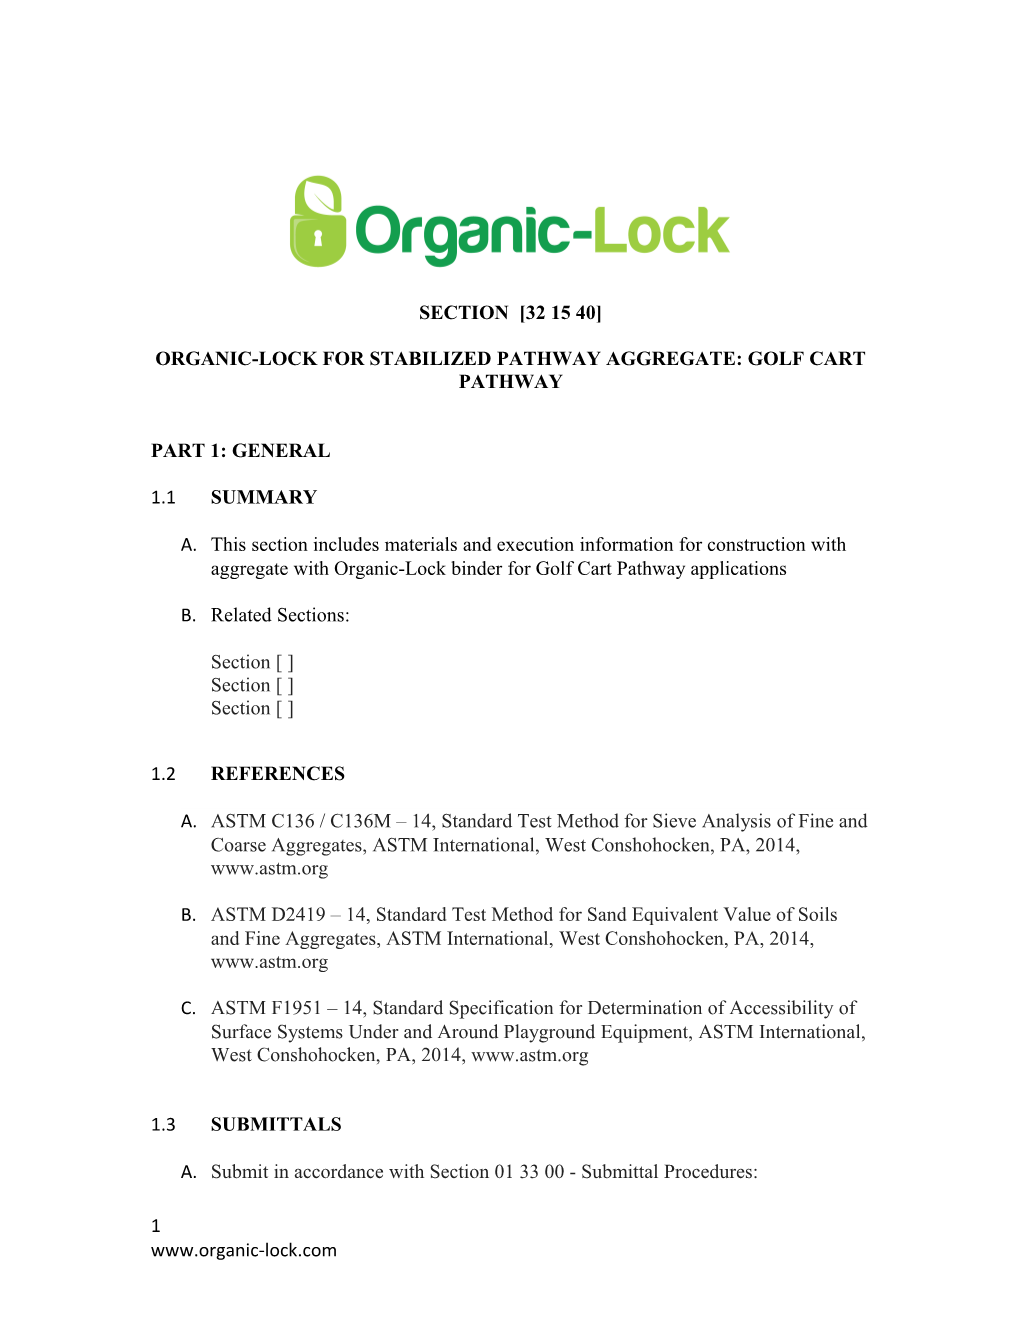 Organic-Lock for Stabilized Pathway Aggregate: Golf Cart Pathway